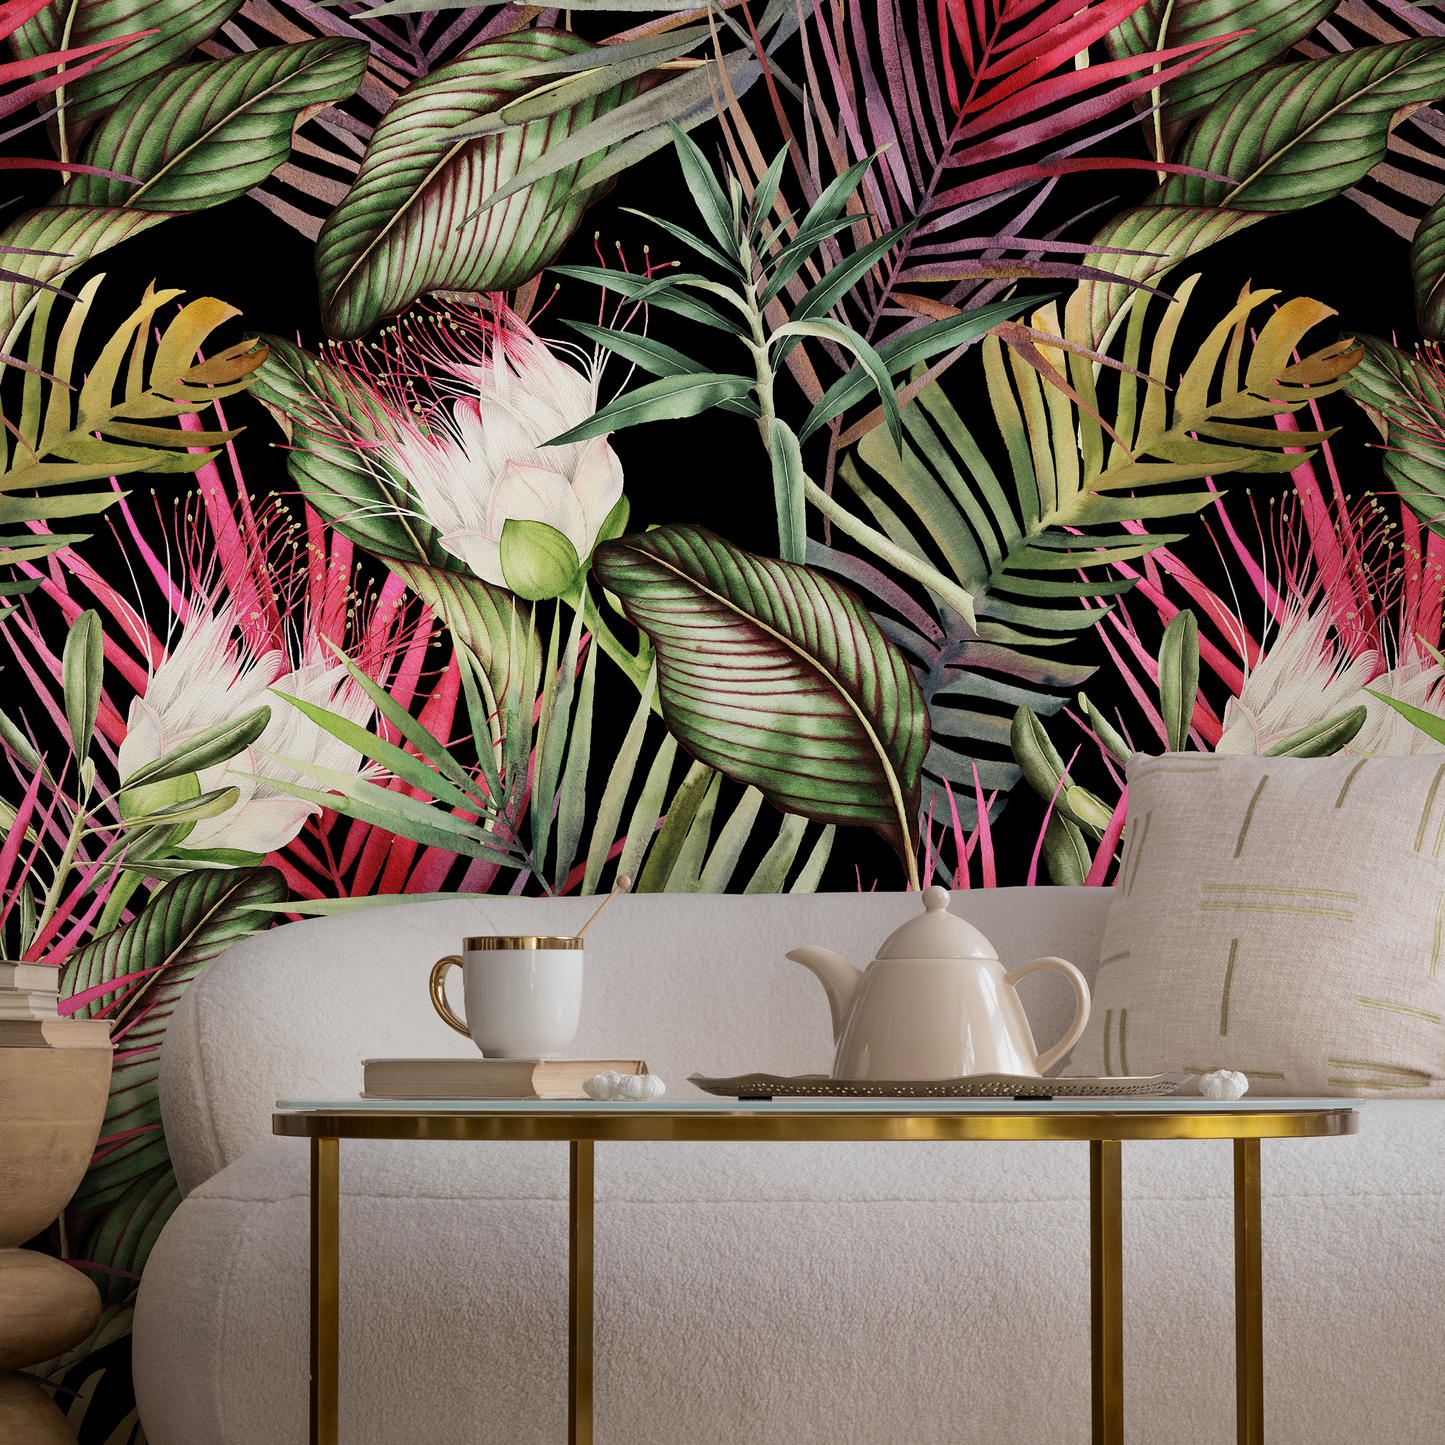 Wallpaper Peel and Stick Wallpaper Removable Wallpaper Home Decor Wall Art Wall Decor Room Decor /  Cool Tropical Leaves Wallpaper -  A835